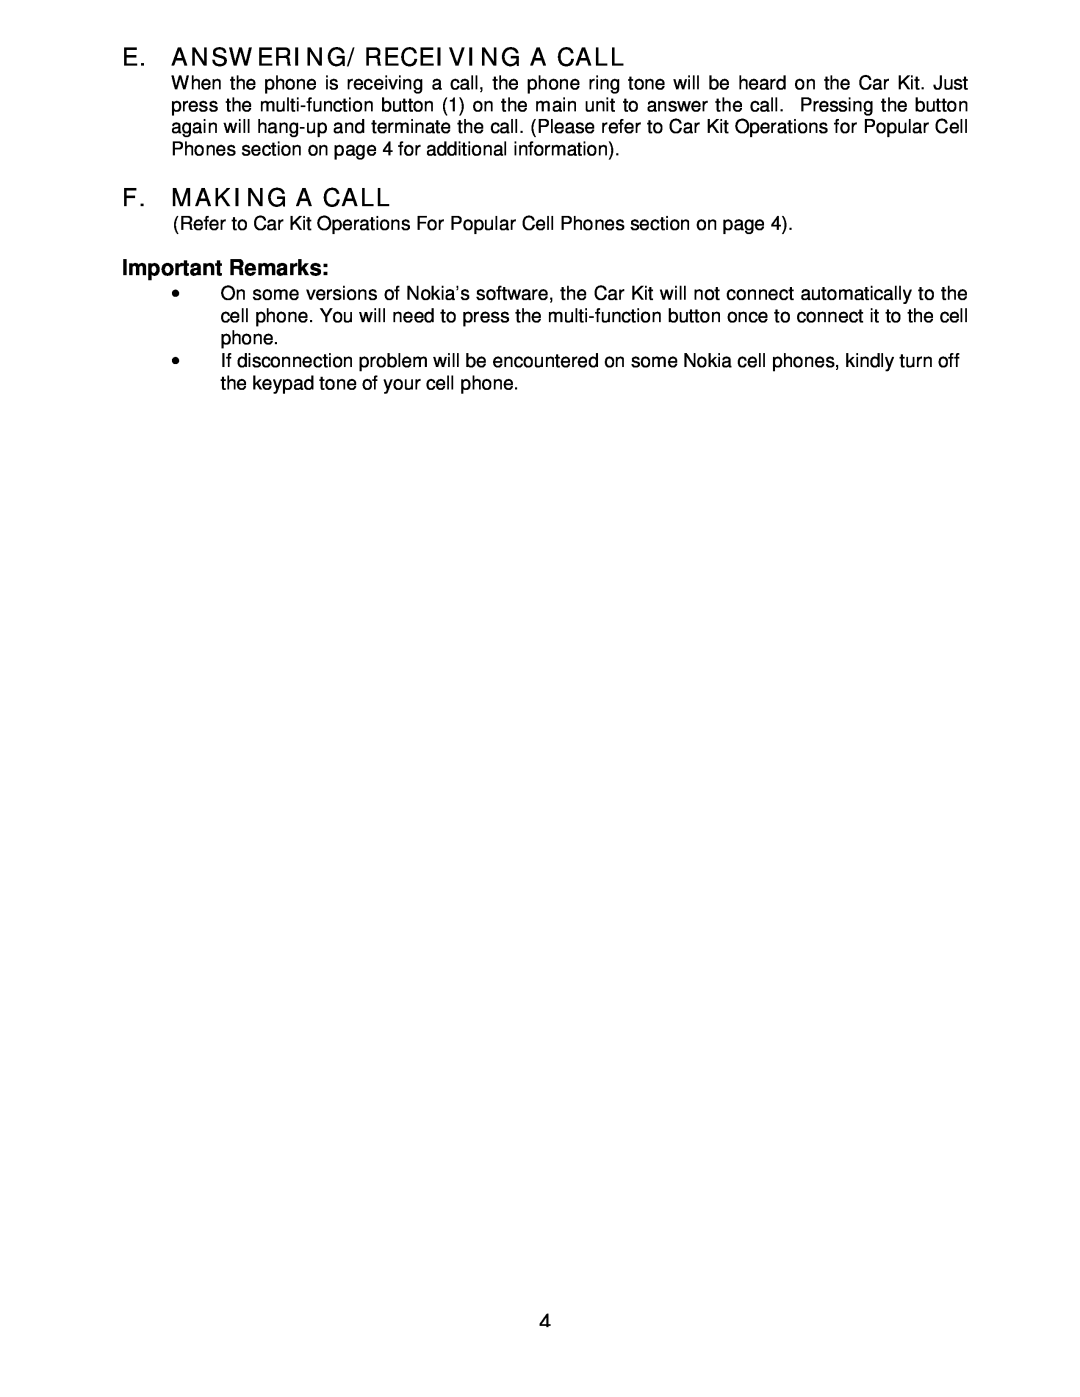 Sony headphone manual E. Answering/Receiving A Call, F. Making A Call, Important Remarks 